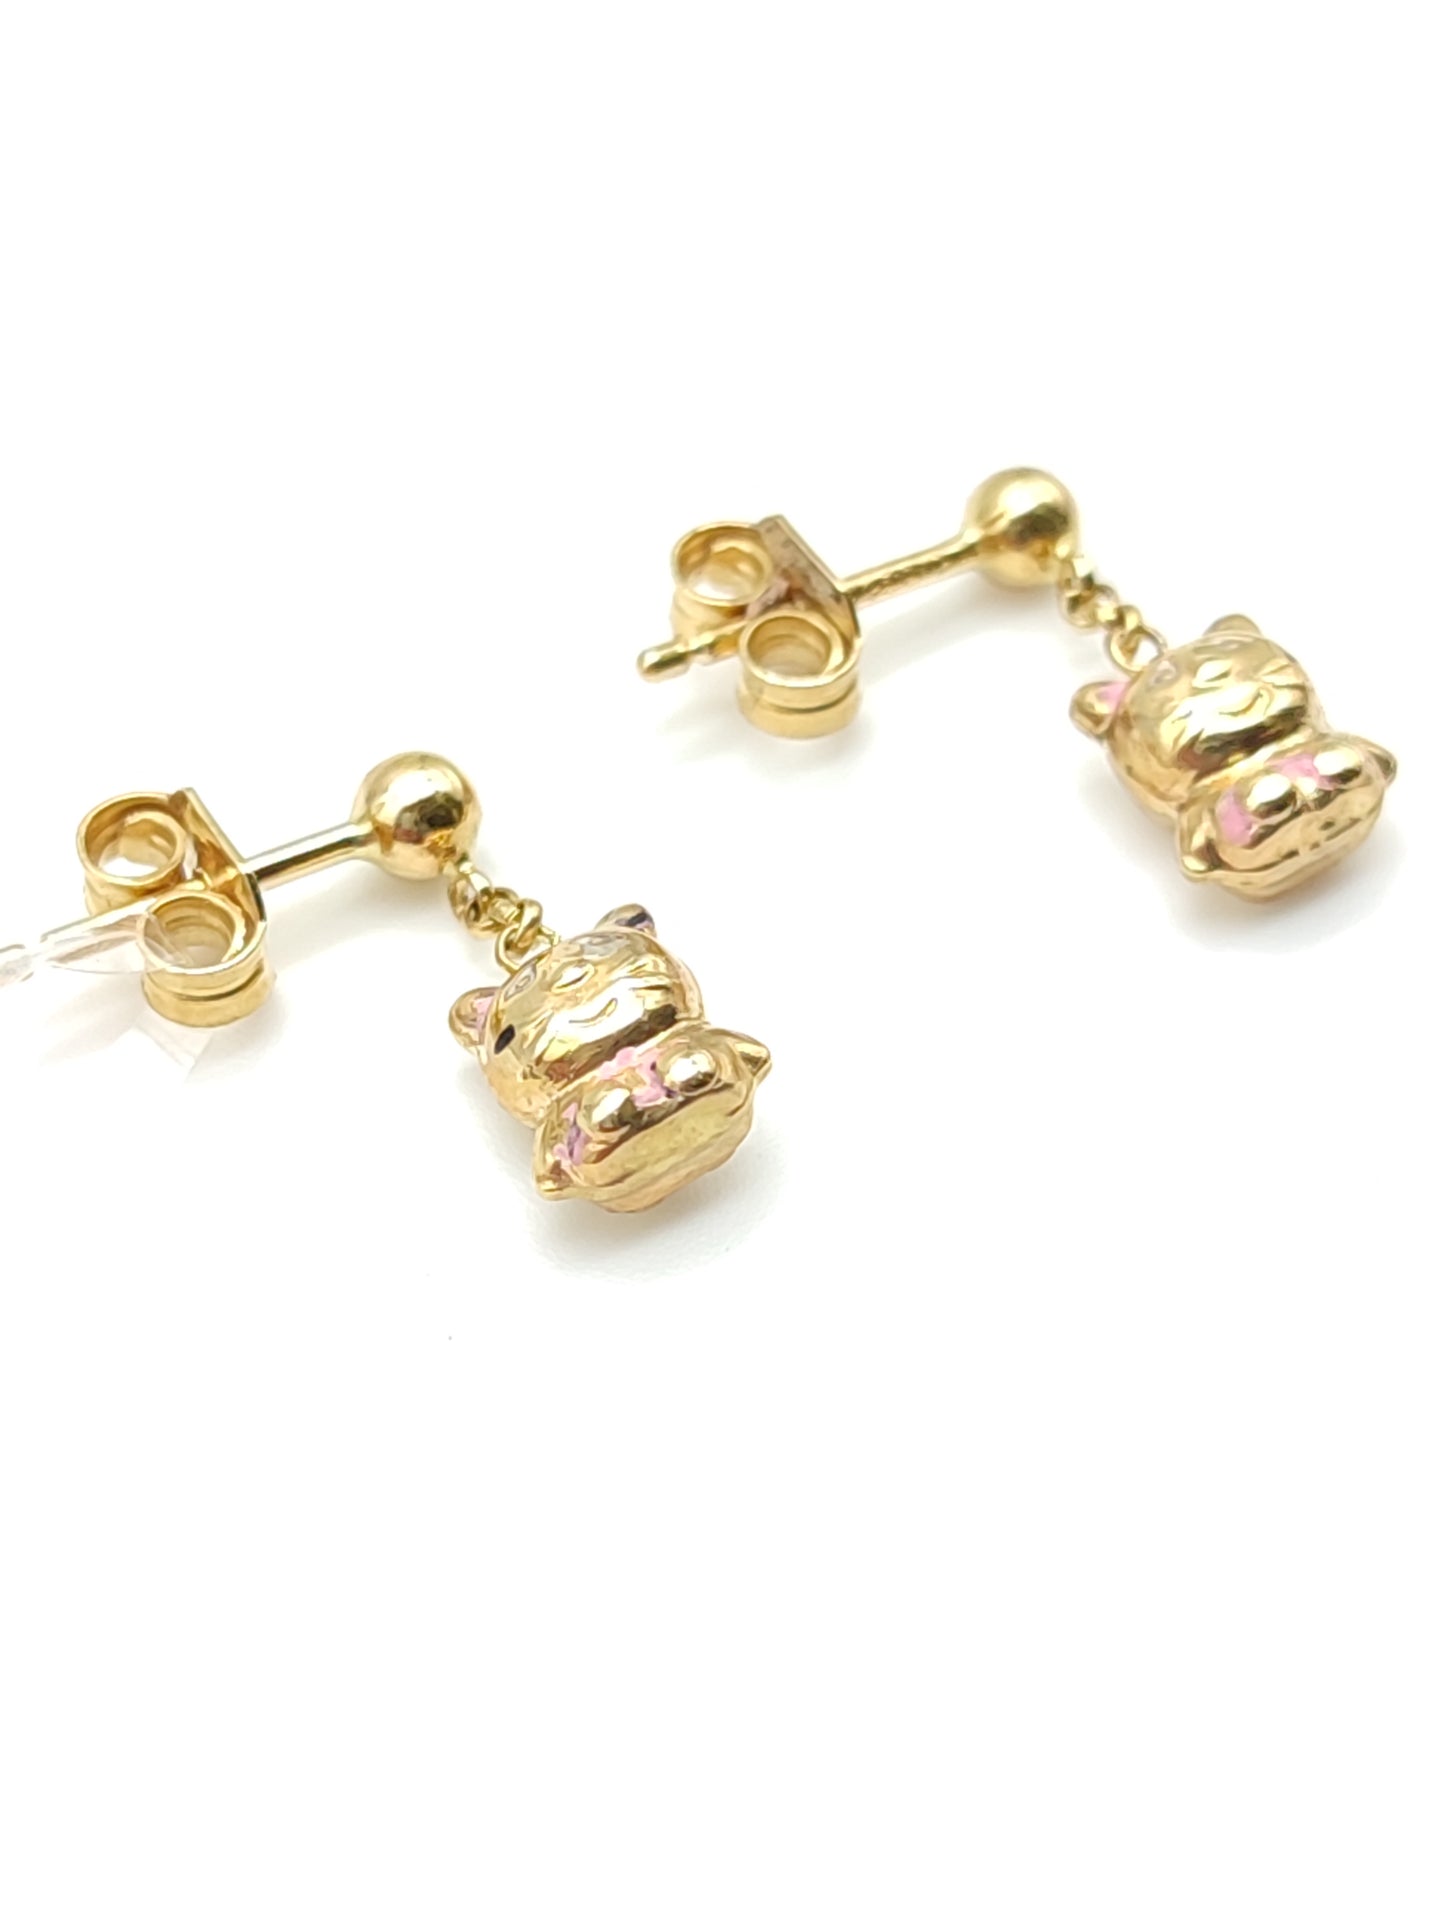 Gold earrings with hanging kitten